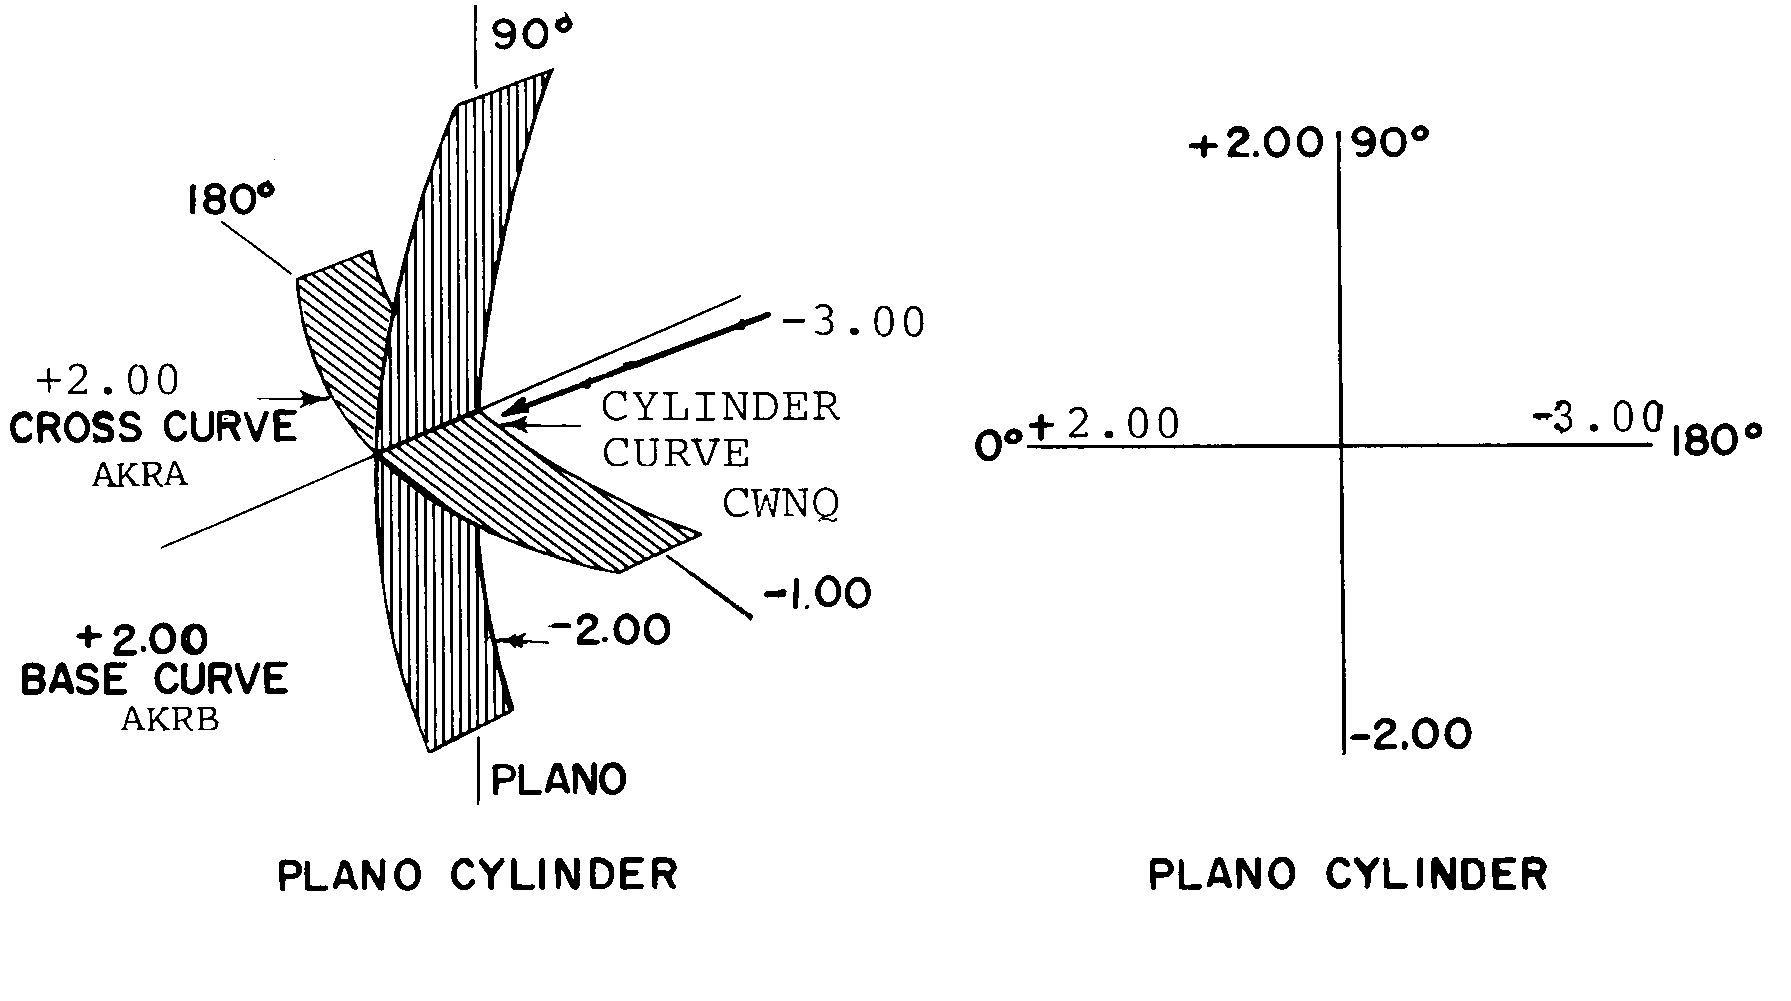 PLANO CYLINDER style nsn 6540-01-102-4297